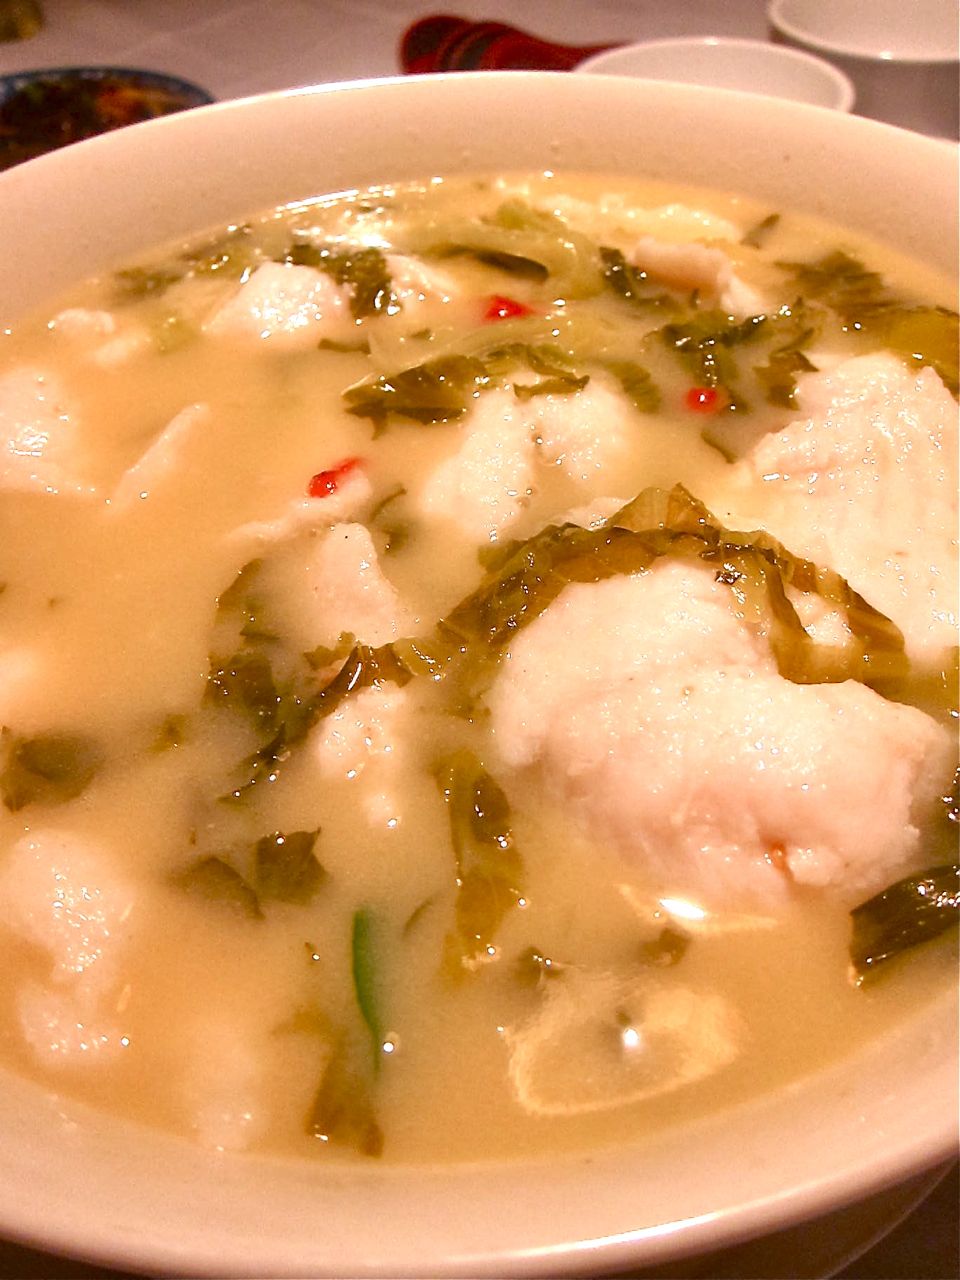 A blind stab at the baffling menu brings splendid “authentic Chengdu soup” with tofu and pickled mustard greens.” Photo: Gael Greene